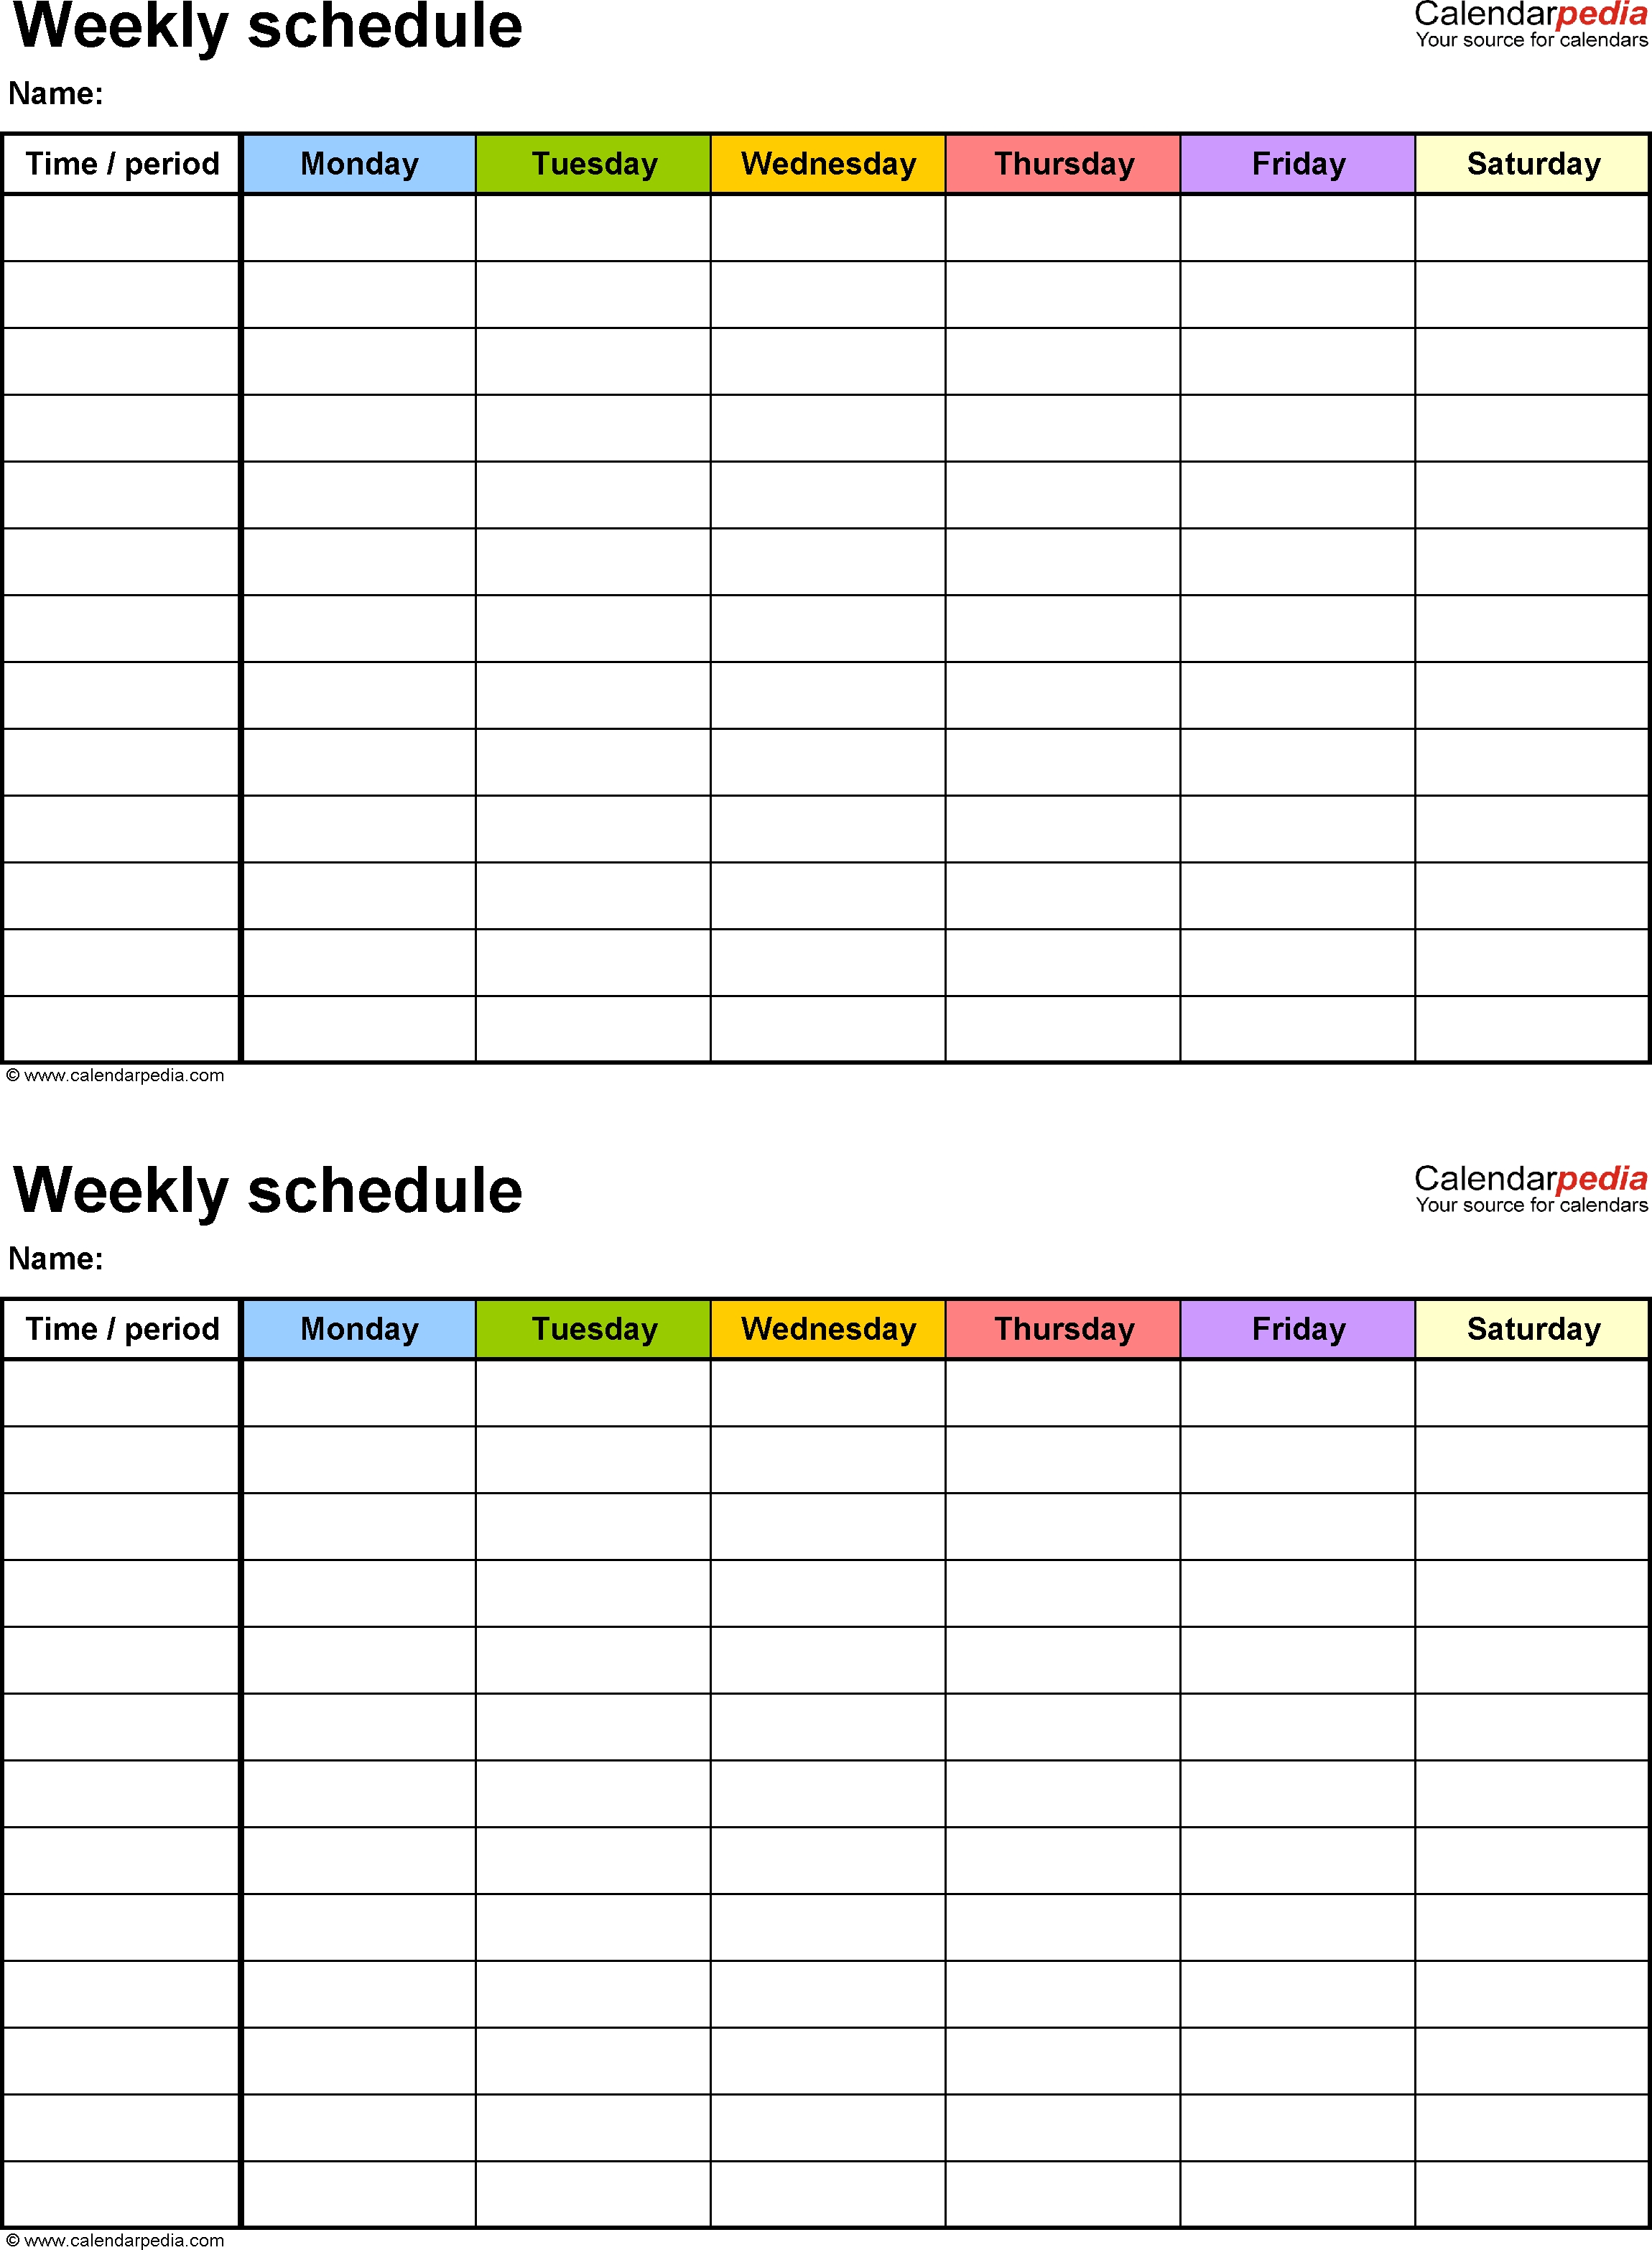 Free Weekly Schedule Templates For Word - 18 Templates with regard to Free Printable Weekly Schedule Planner